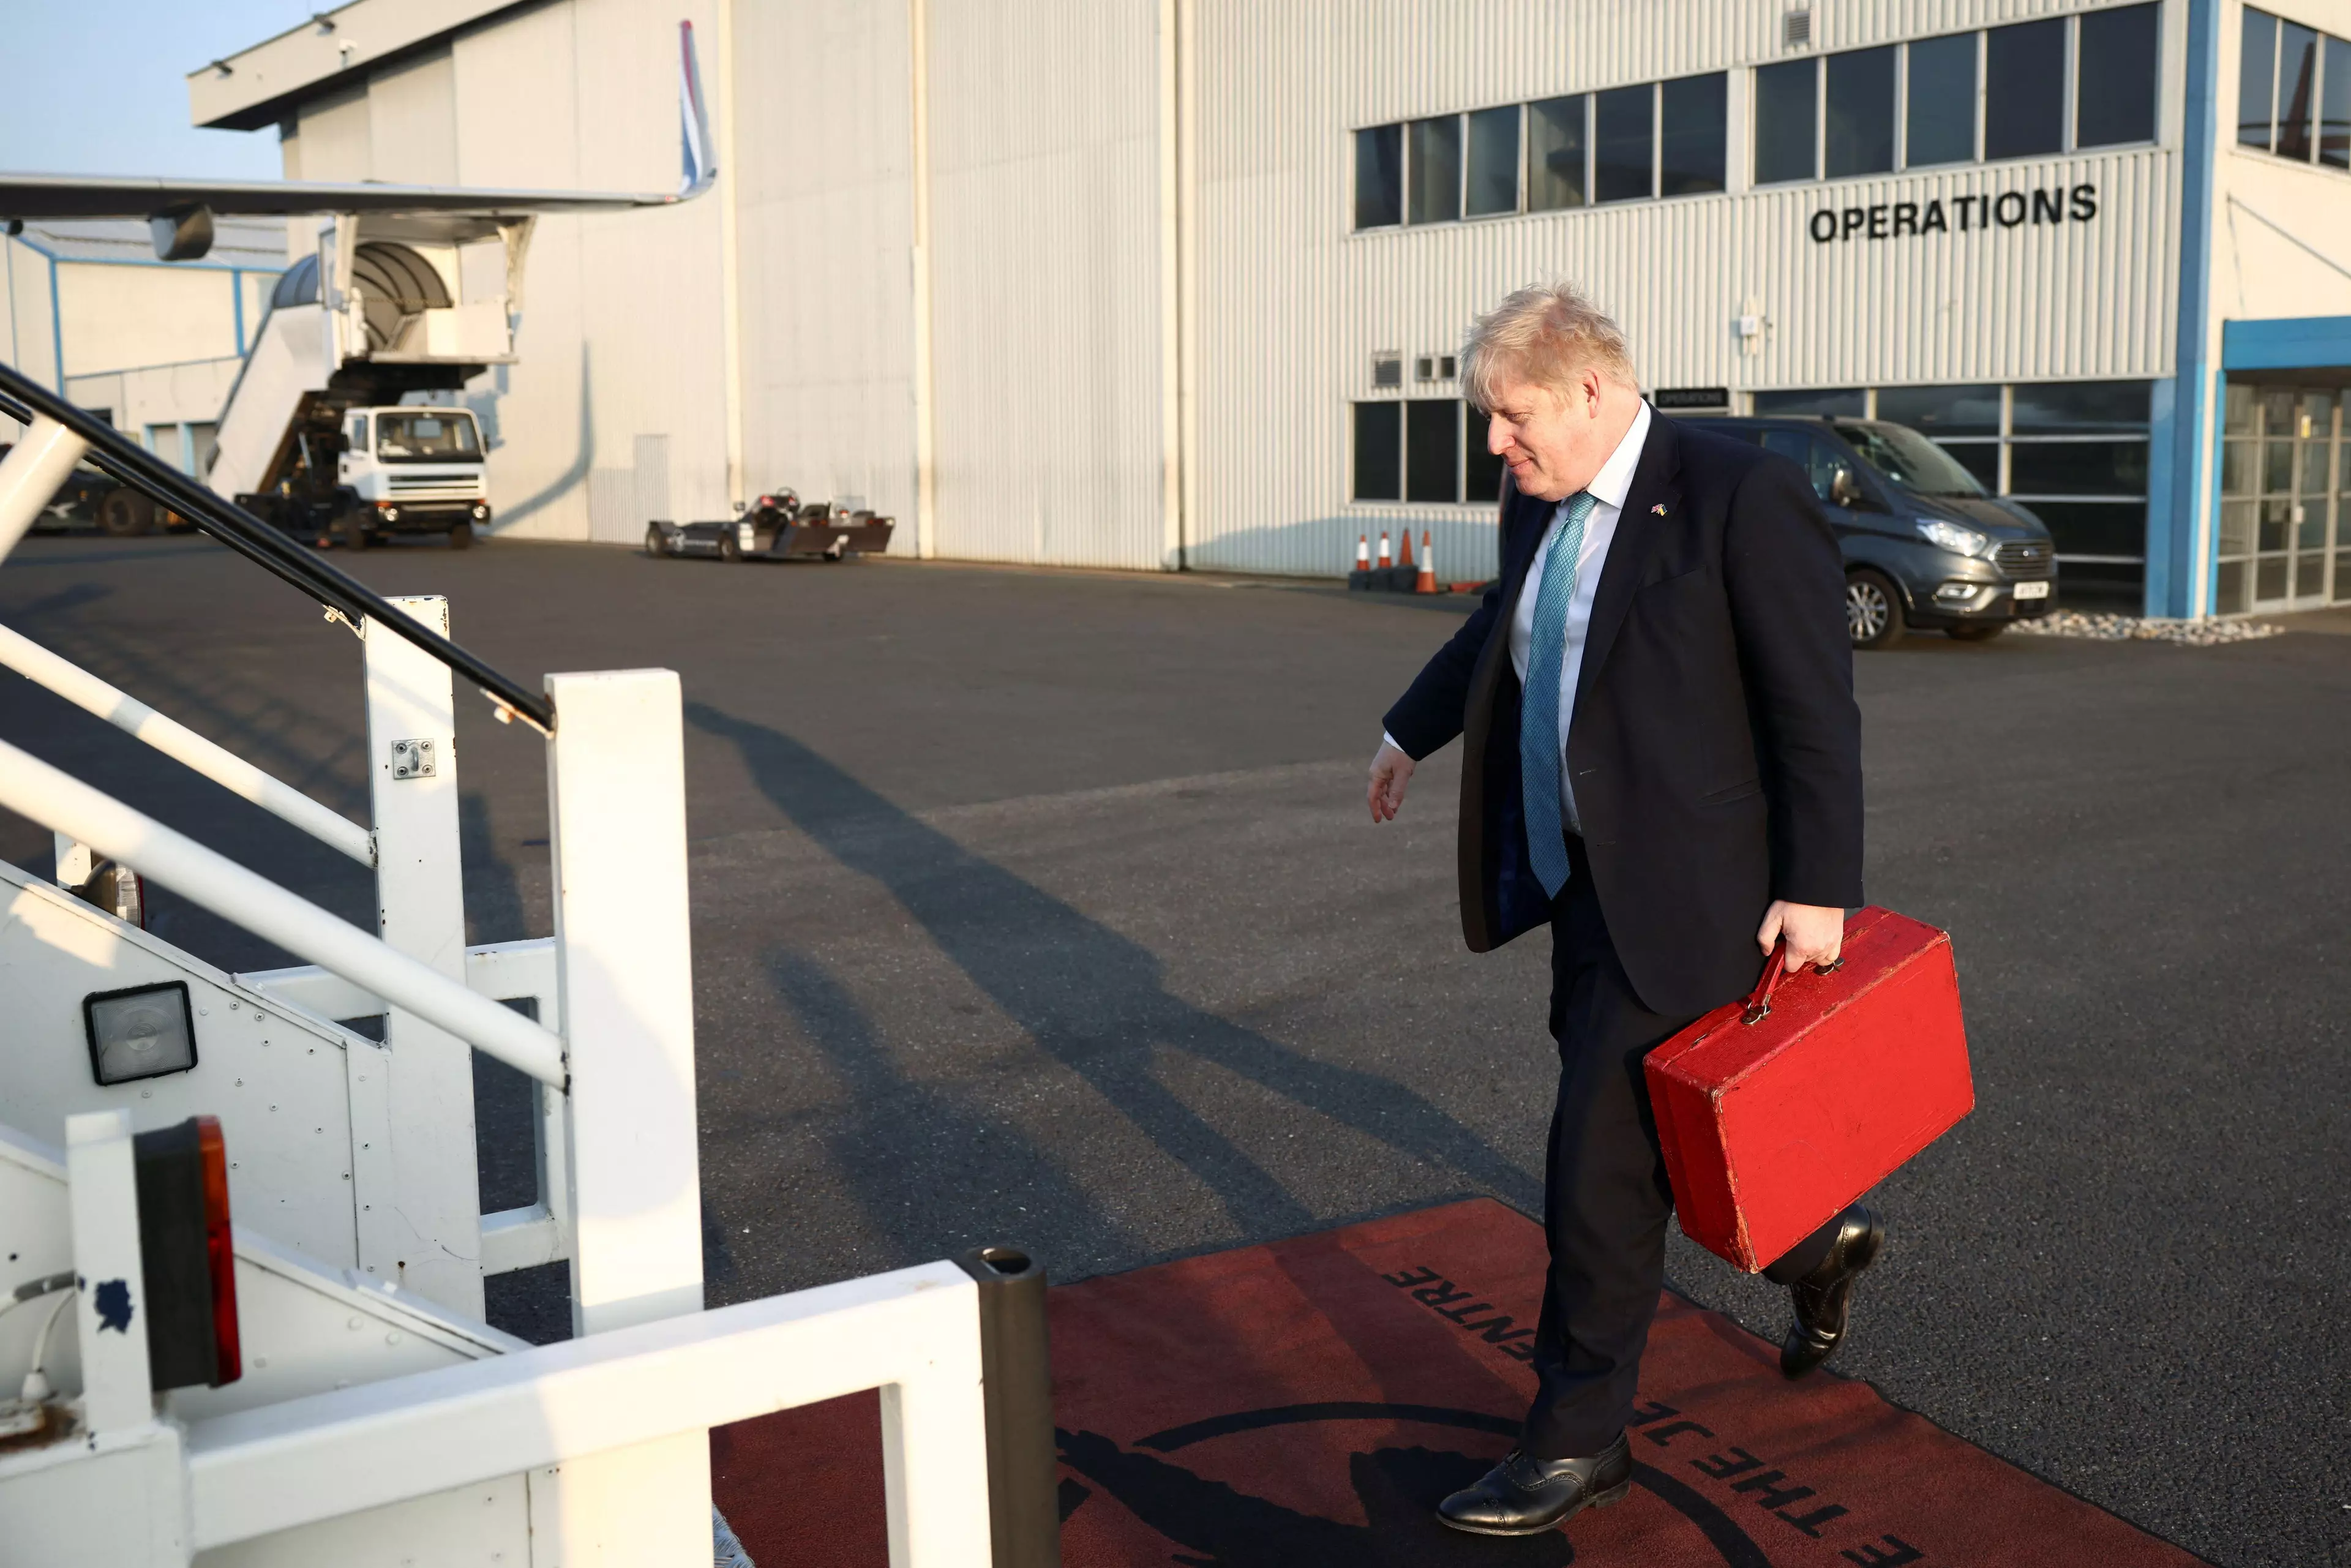 Johnson has travelled to Brussels for a NATO summit.